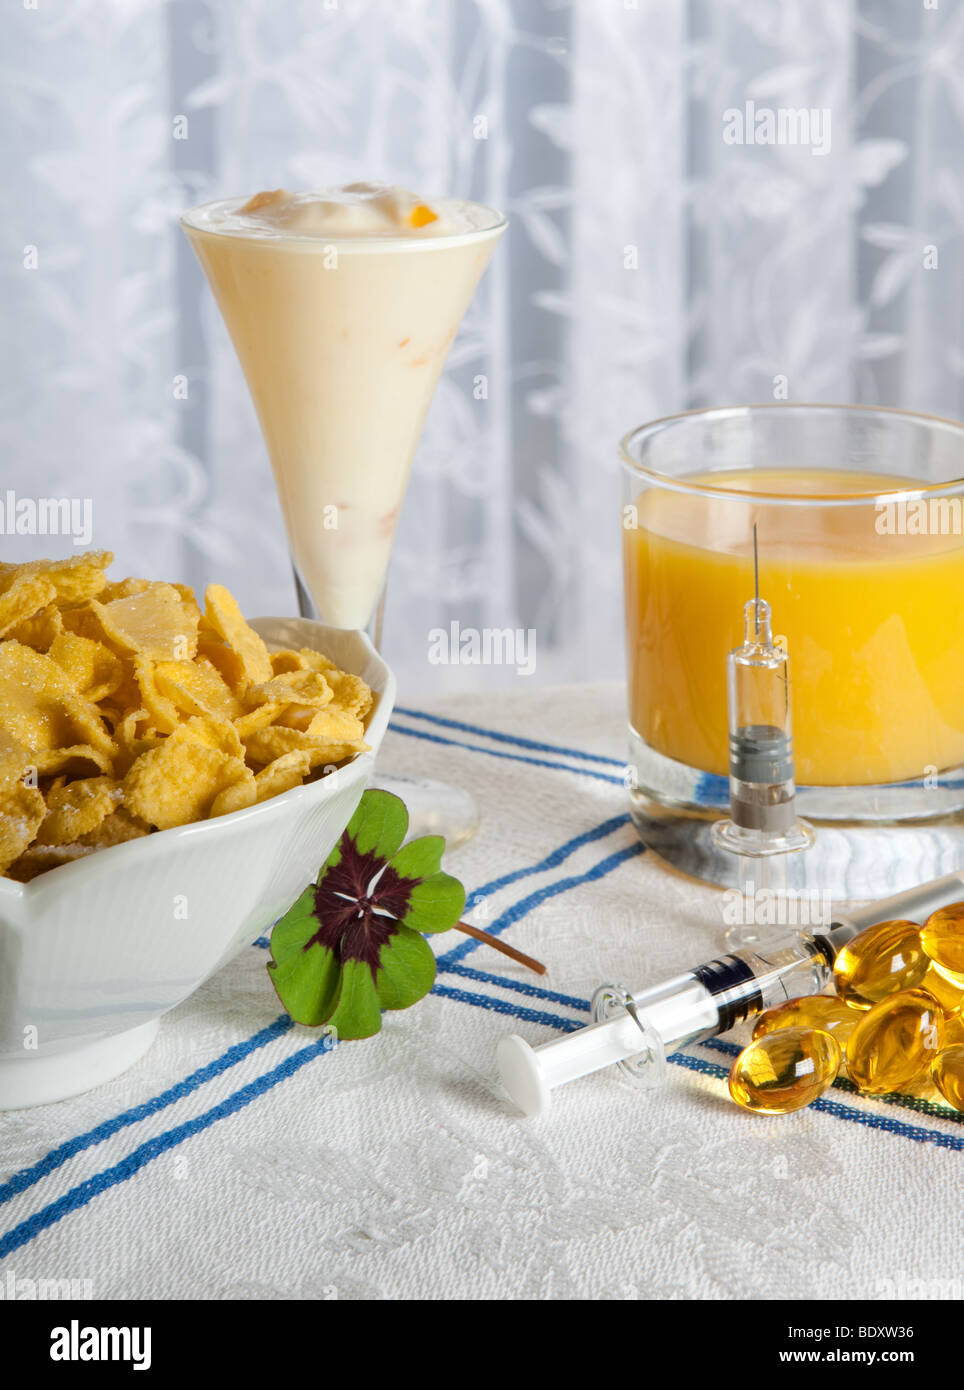 Healthy anti swine flu breakfast with vitamins, flu vaccines and a lucky clover Stock Photo